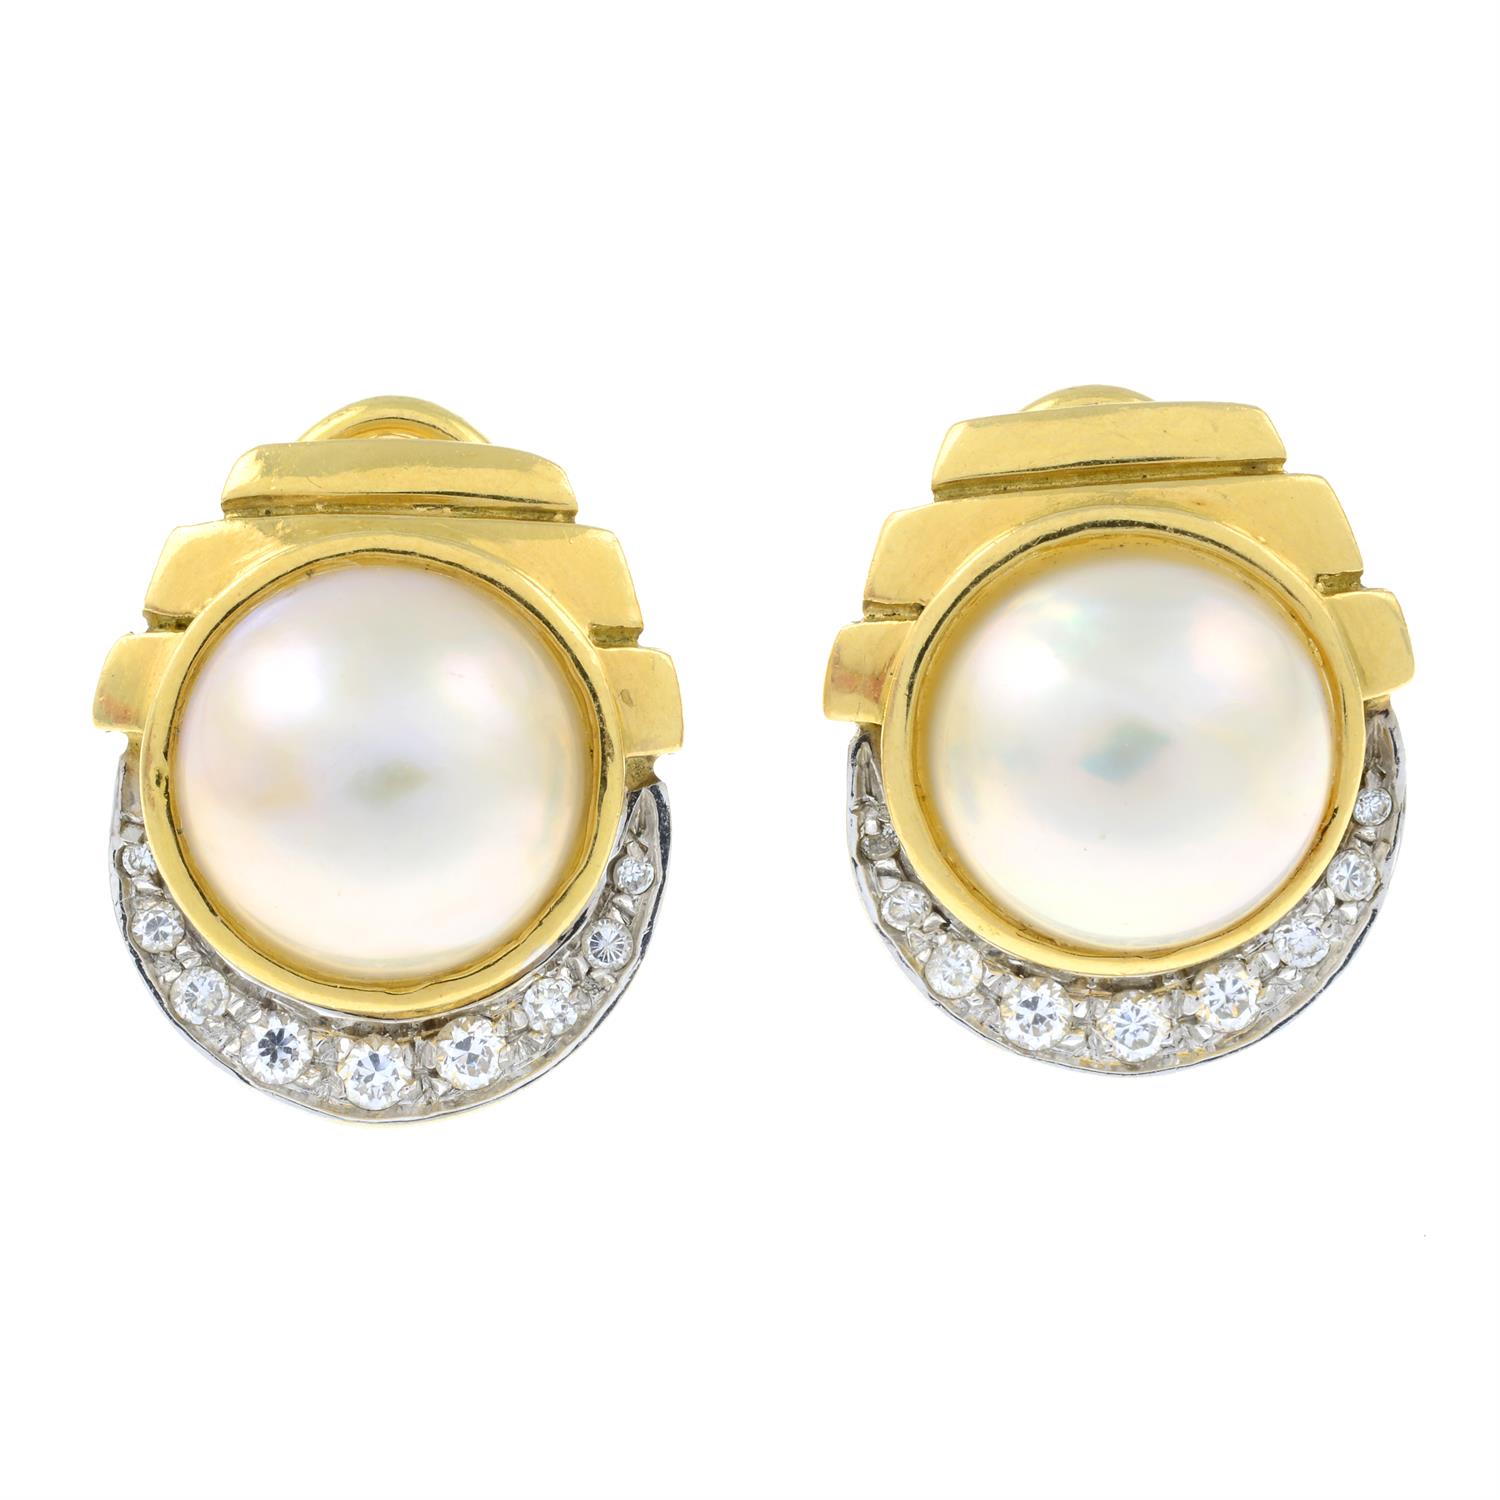 A pair of cultured pearl and cubic zirconia clip-on earrings.